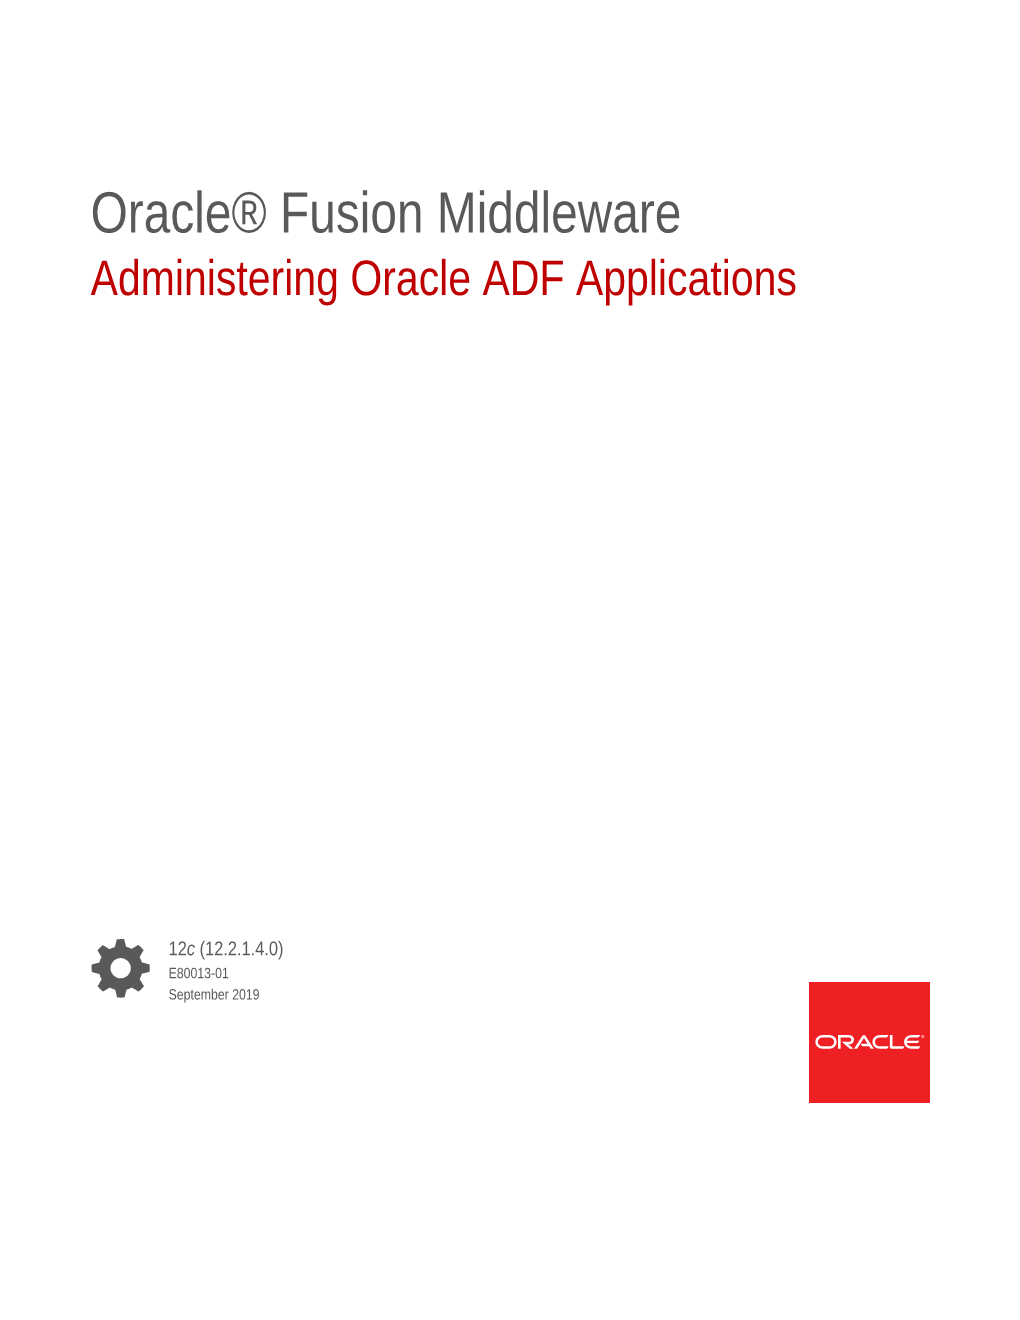 Oracle® Fusion Middleware Administering Oracle ADF Applications